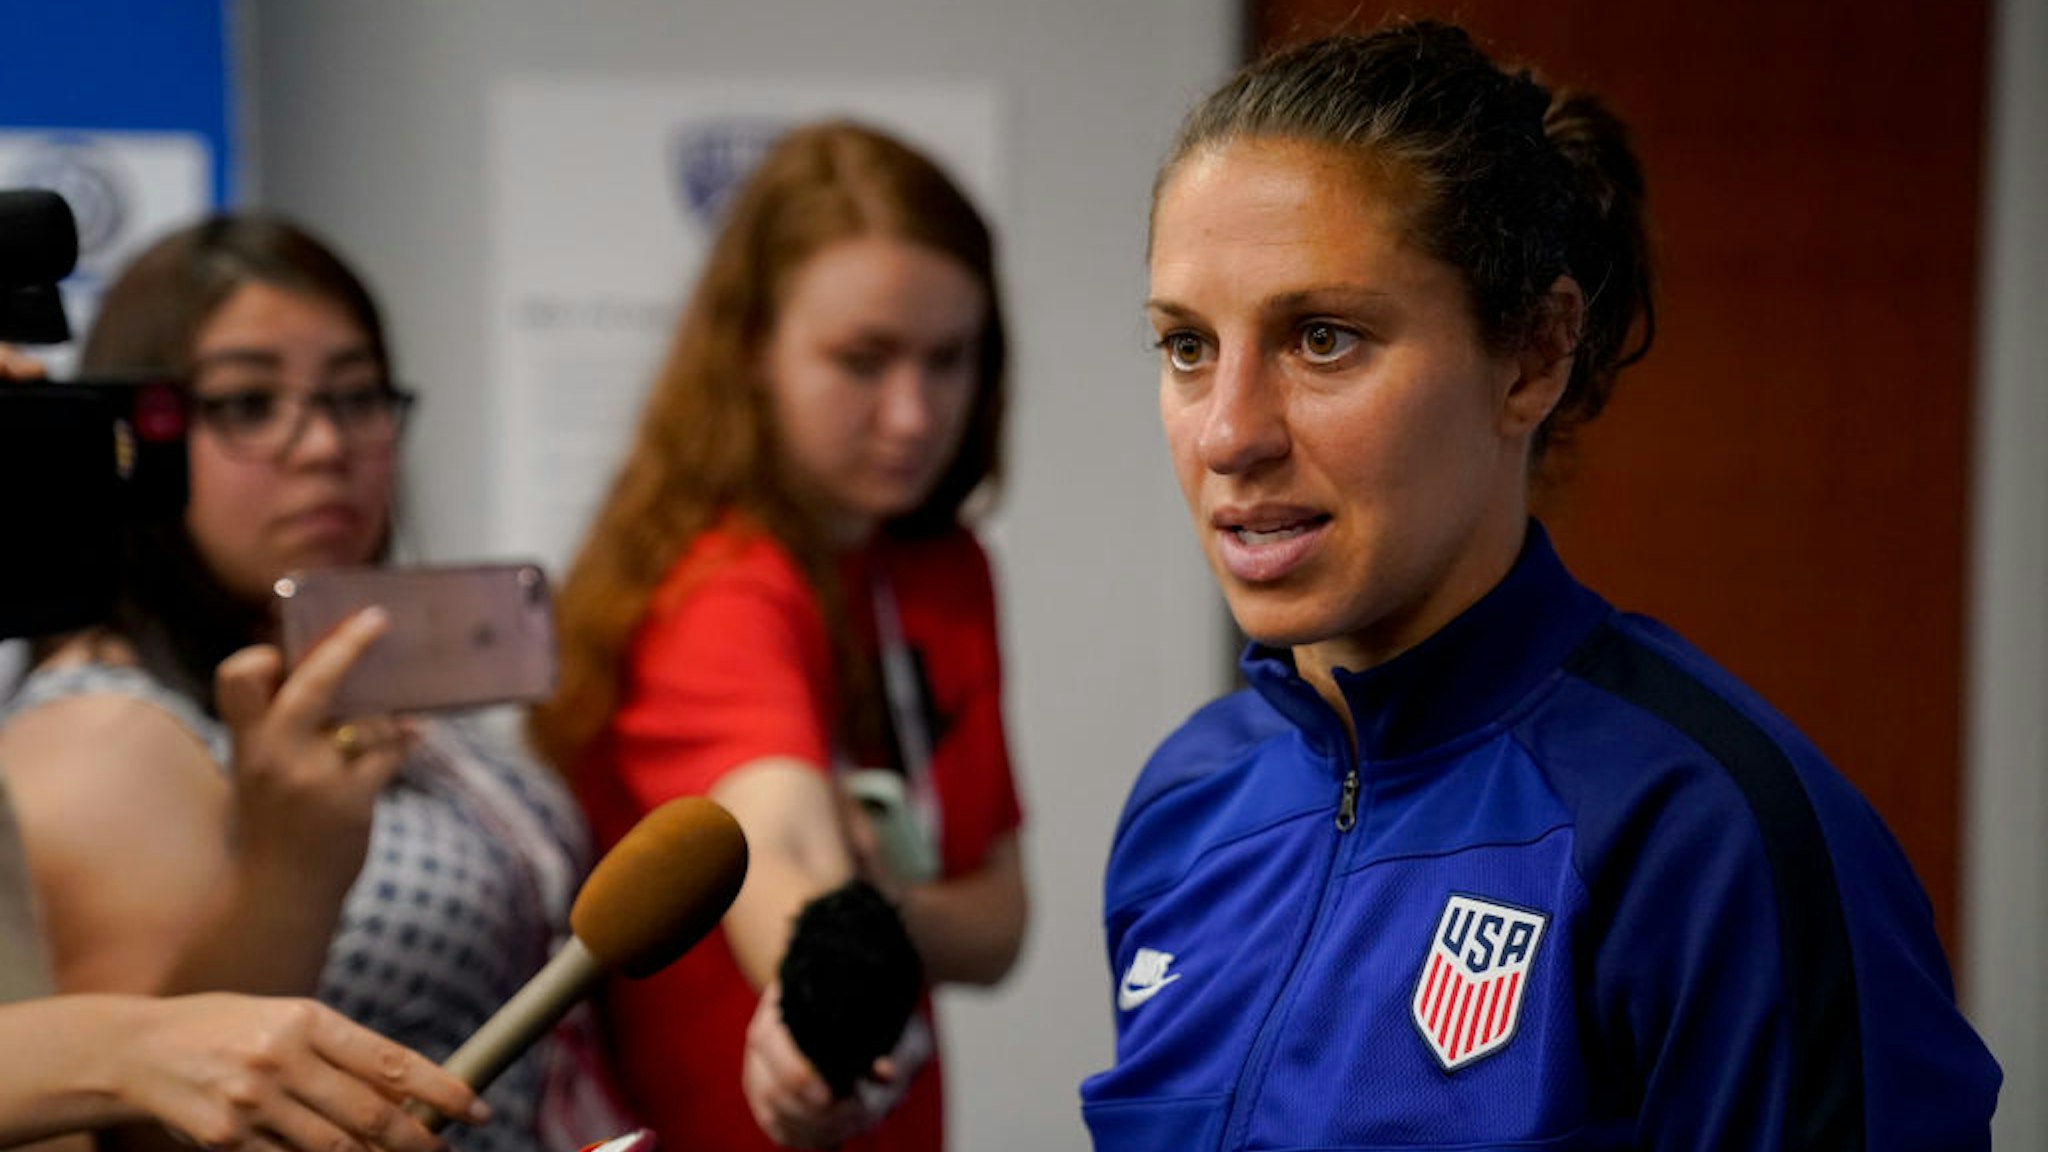 Carli Lloyd #10 of the United States during a game between Japan and USWNT at Toyota Stadium on March 11, 2020 in Frisco, Texas.